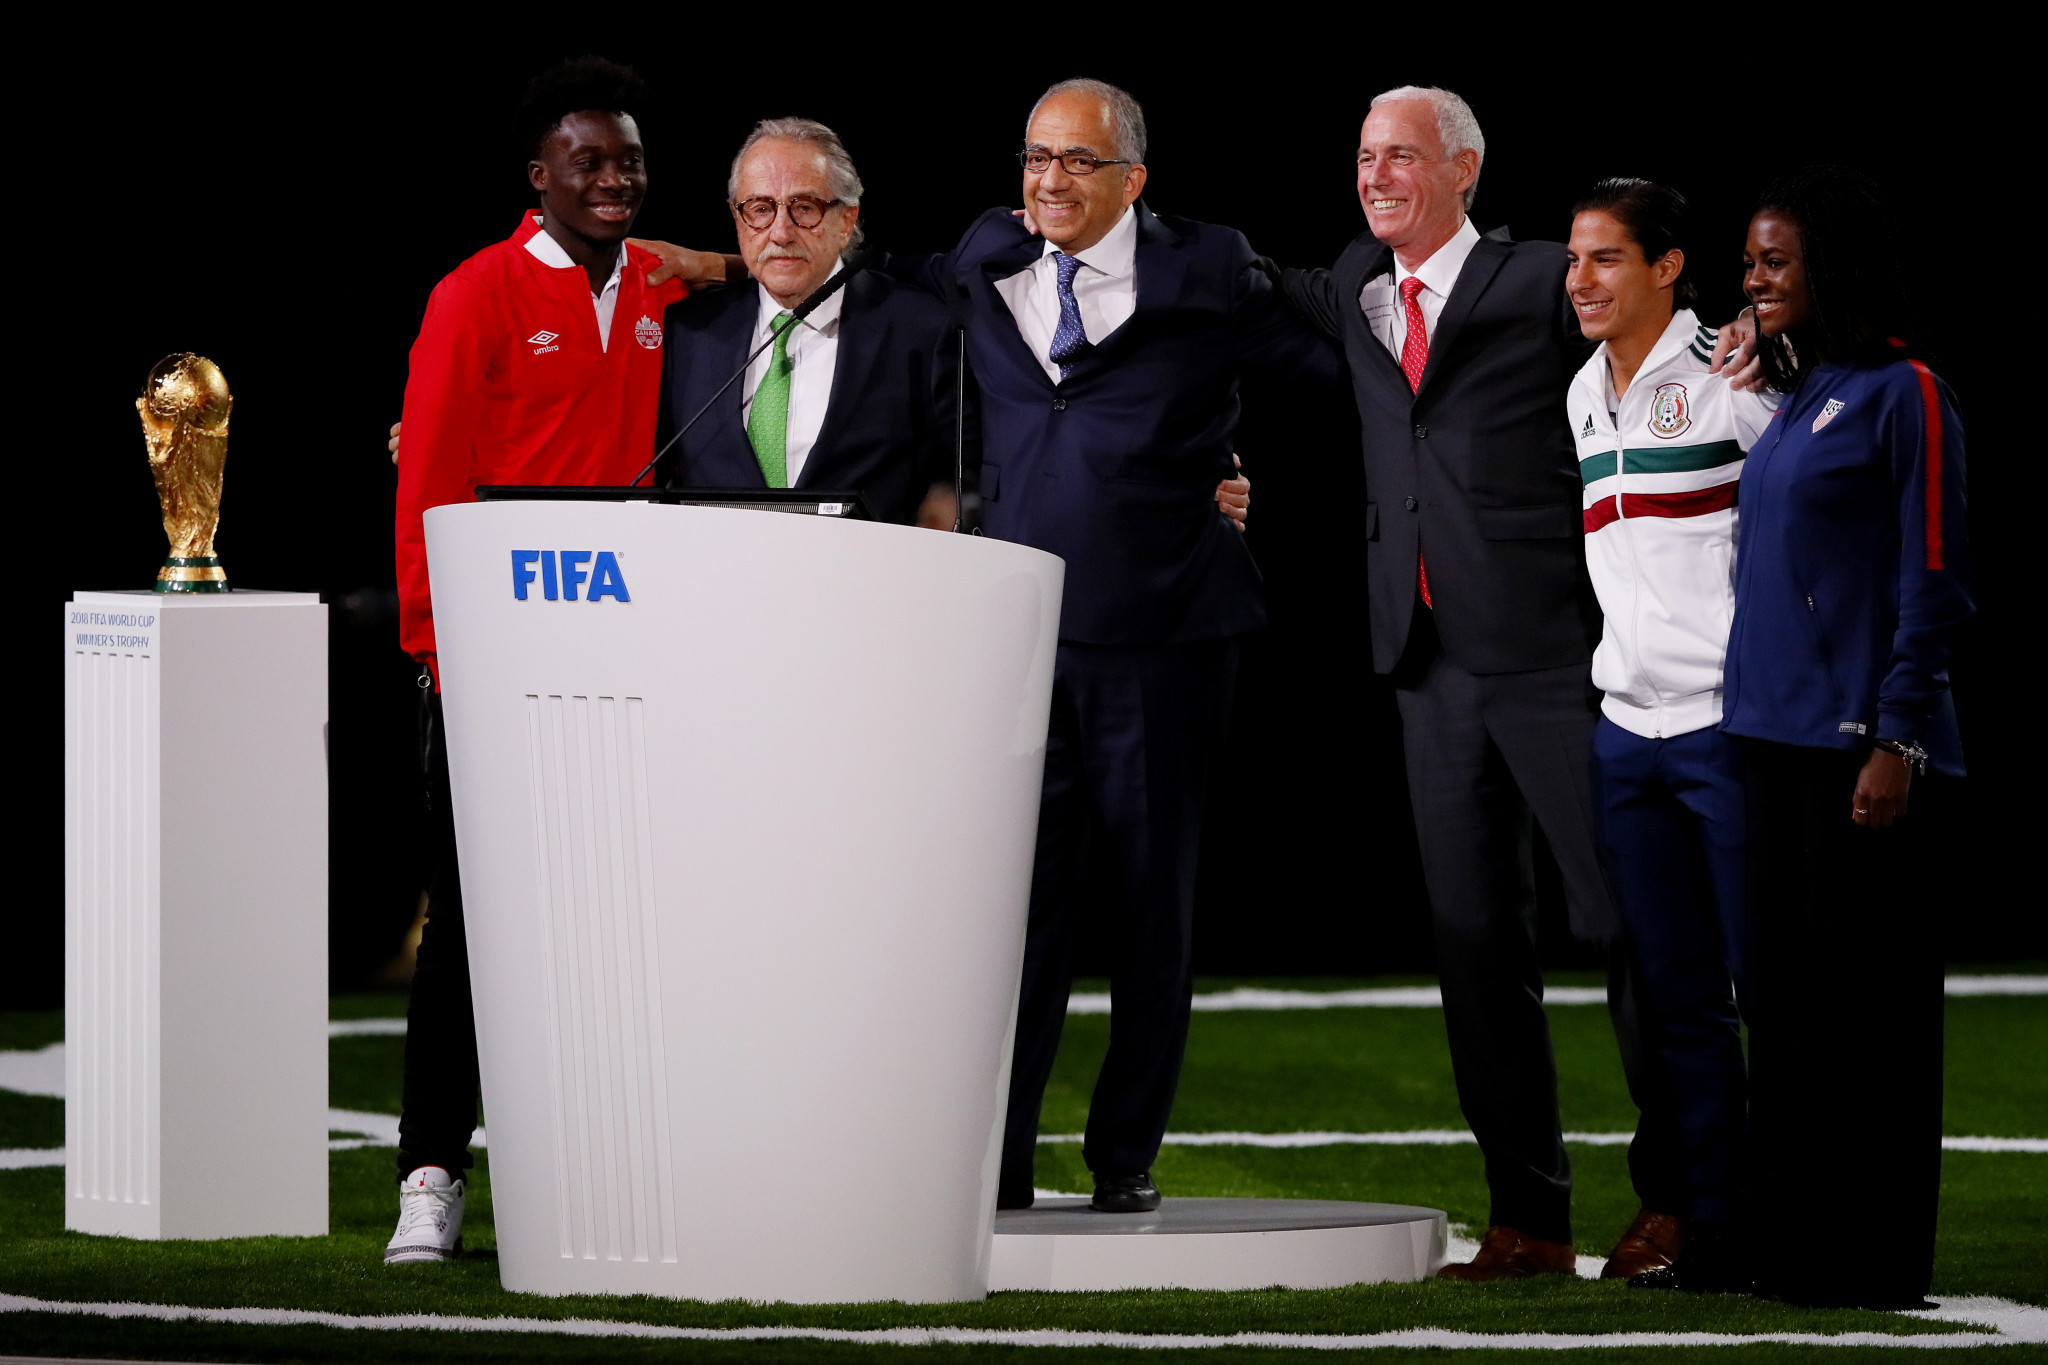 Successful United 2026 speakers gather on stage to celebrate their victory ©Getty Images